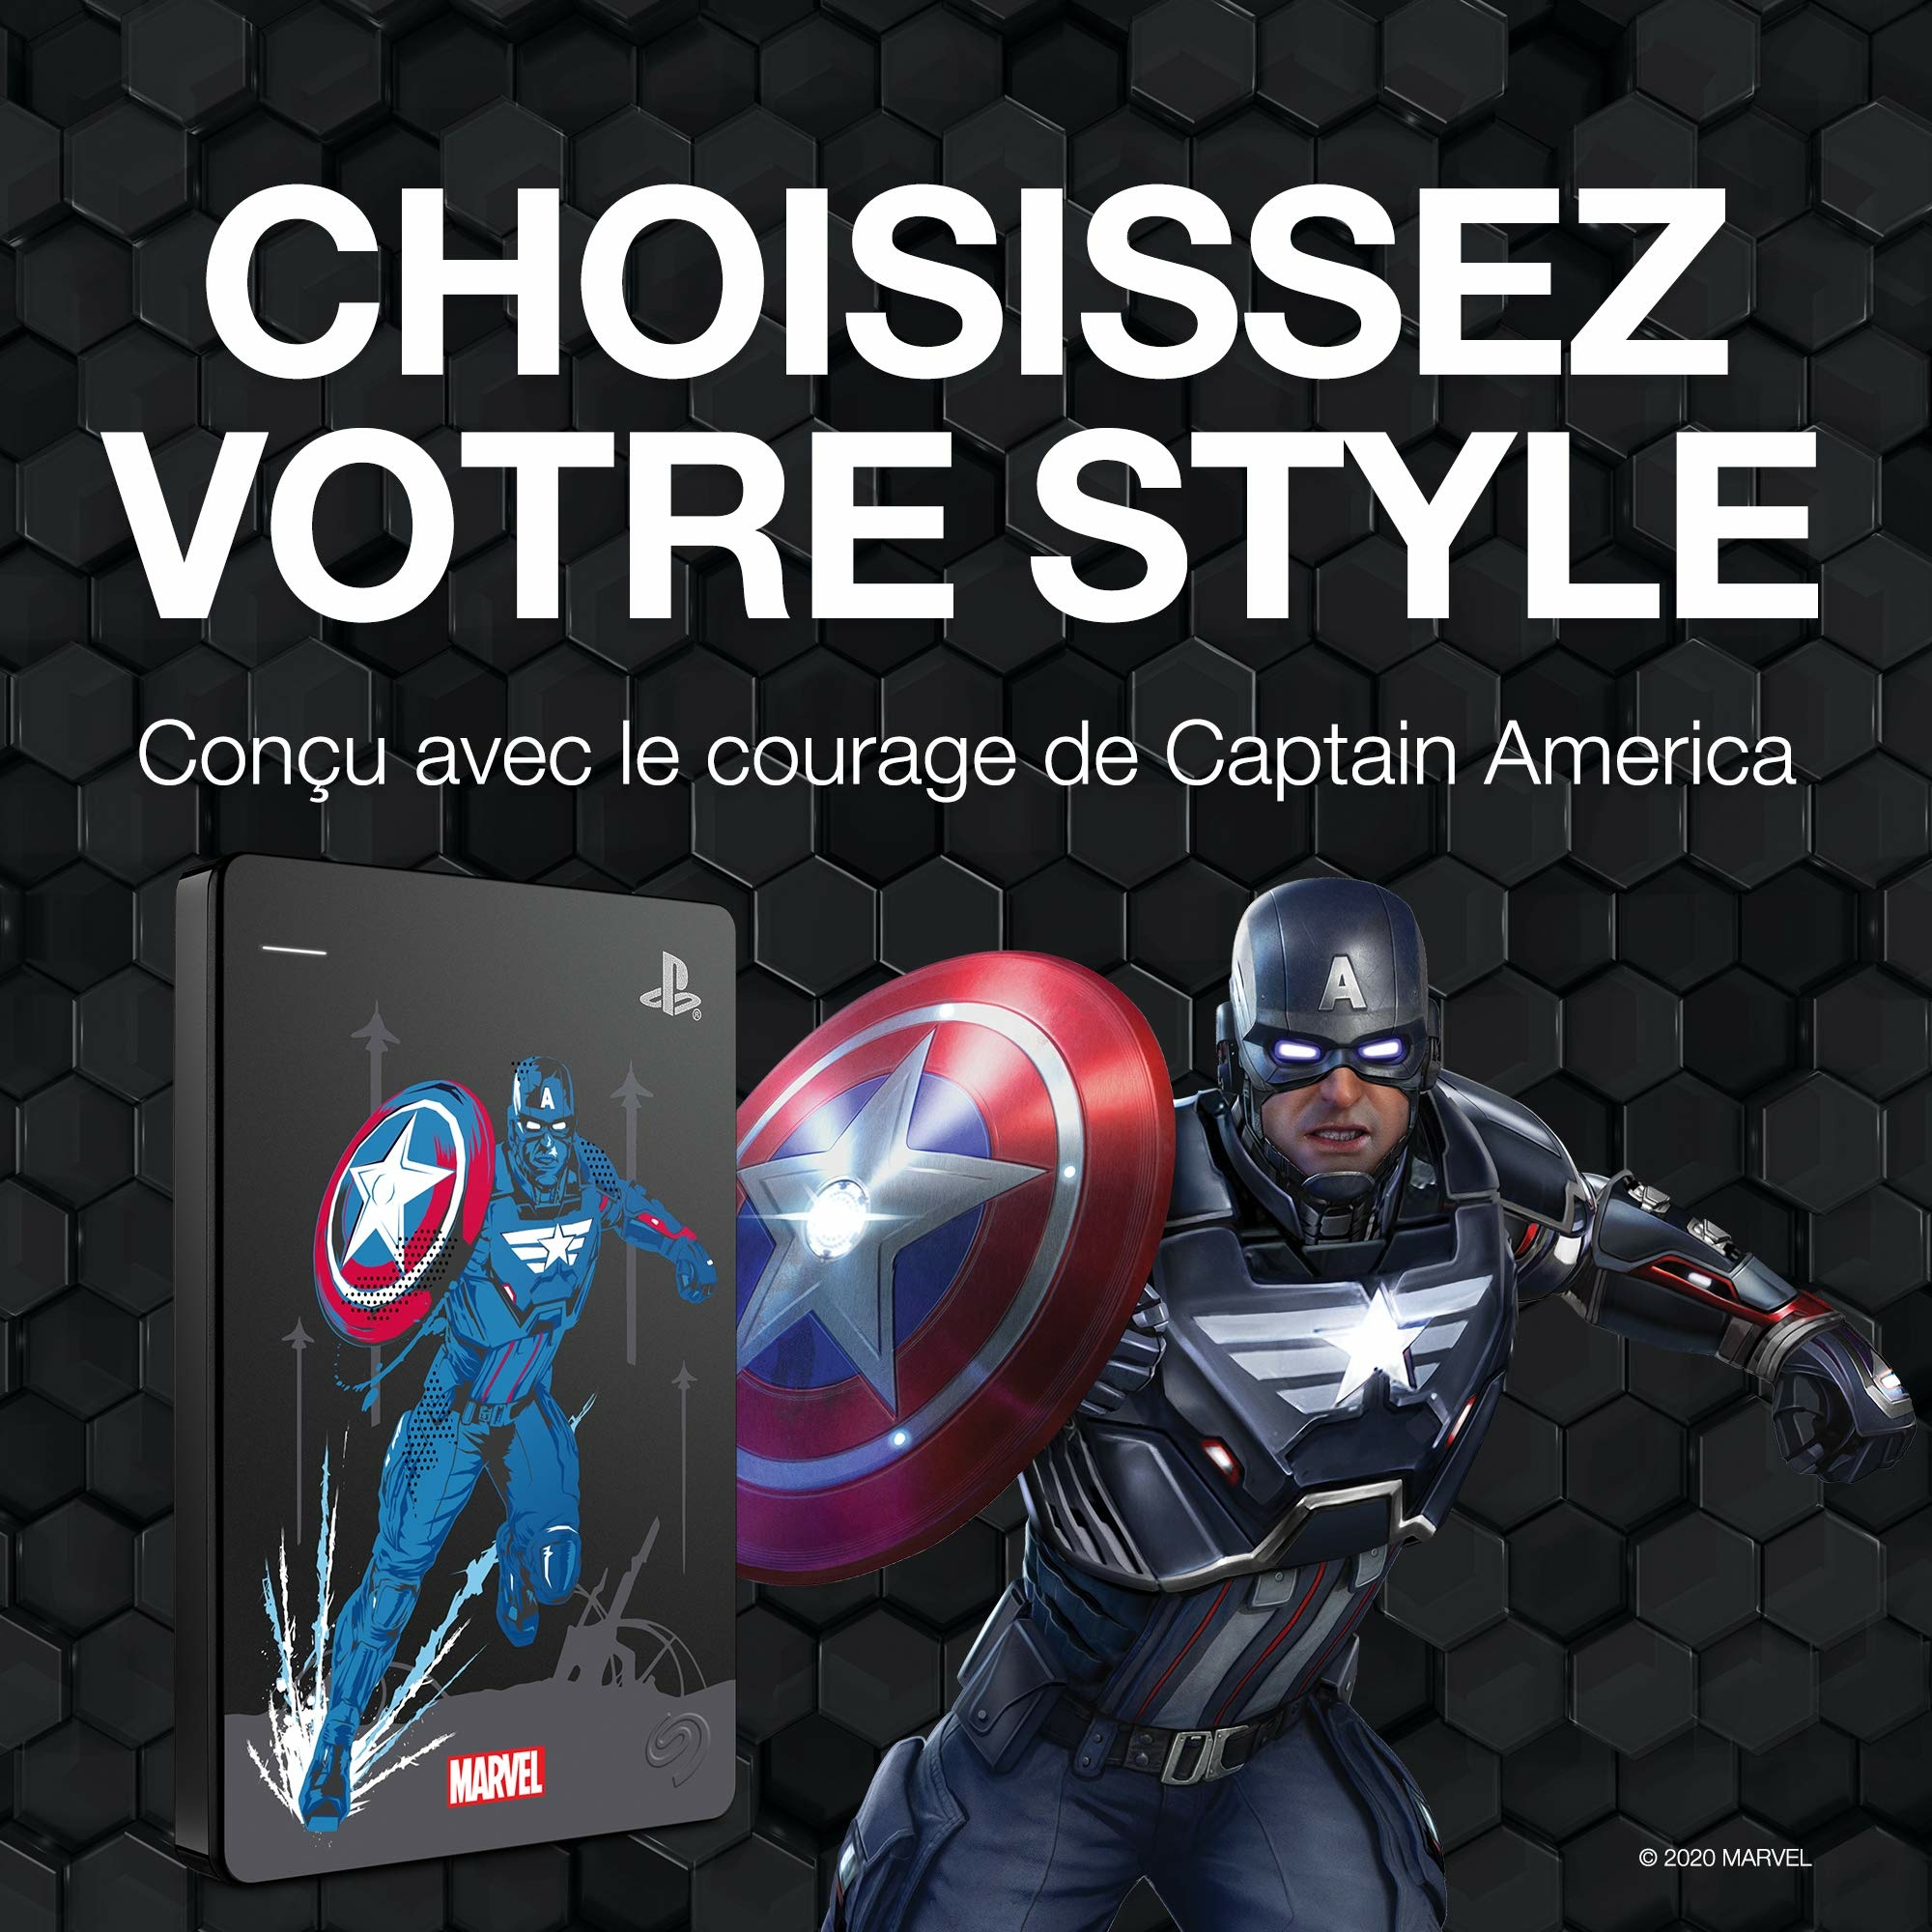 Disque Dur Externe Seagate Game Drive Collector 2To - Team Avengers